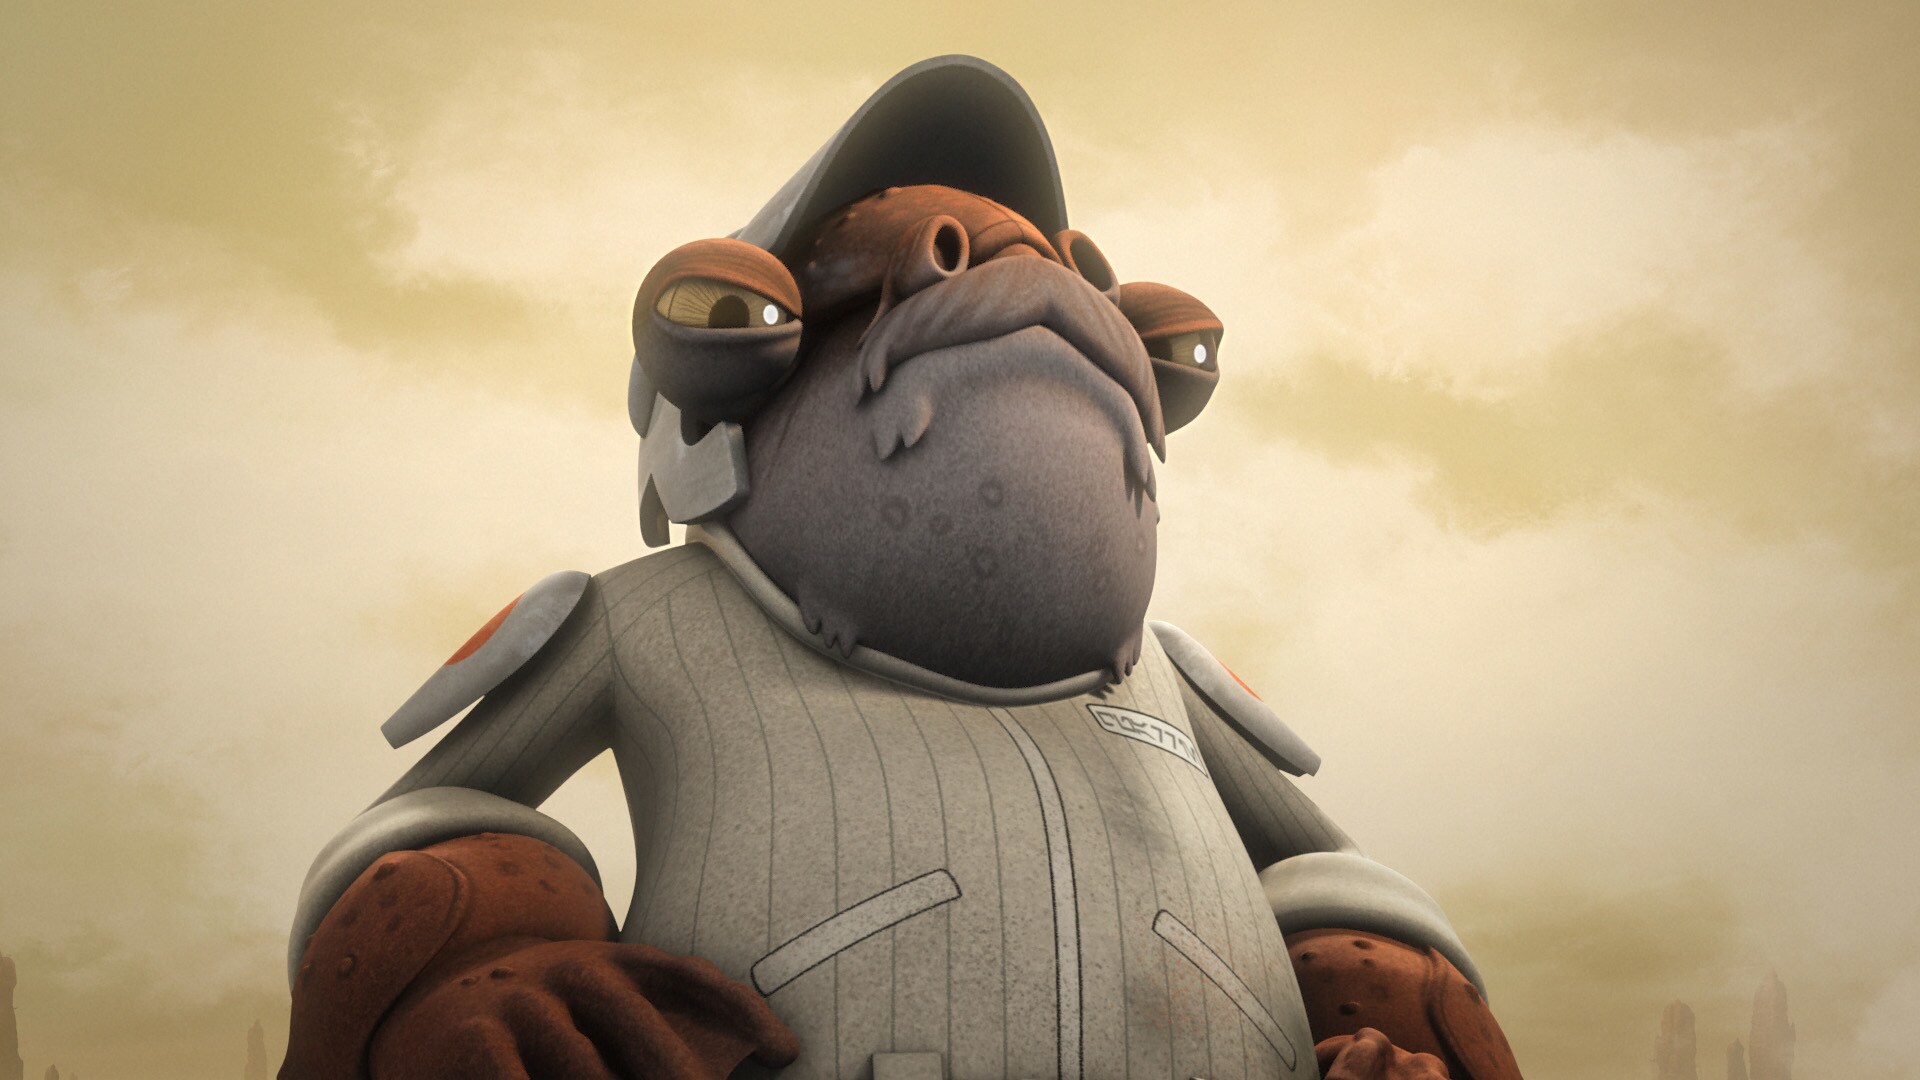 Quarrie! The short Mon Calamari engineer is gruff, but excited to have guests who may be able to ...